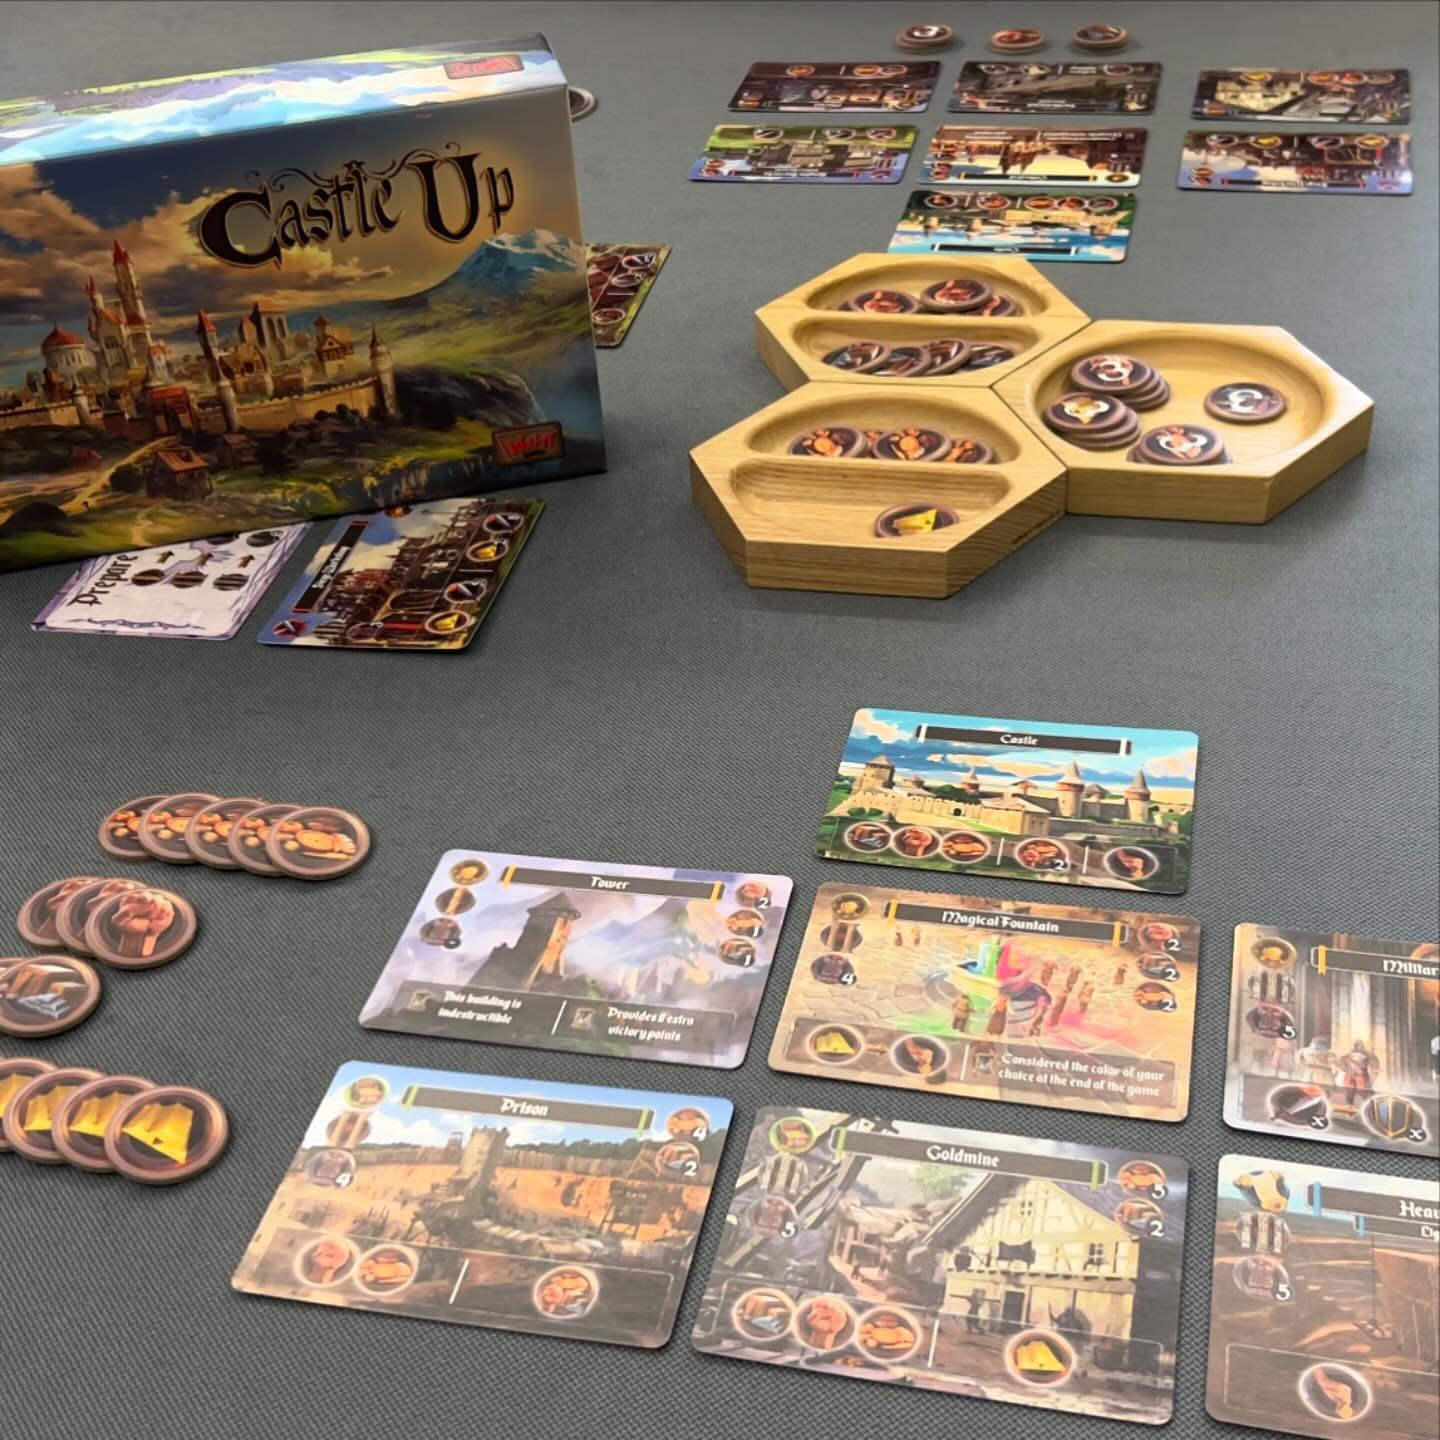 🇵🇹⬇️//🇬🇧 Wolley Games surprised us with Castle Up, a medieval city-building game compacted into a small box. 🏰
.
If you are usually keen on quick-to-play card games, we dare to say that this game may be right up your alley. ⚔️
.
On our profile, 